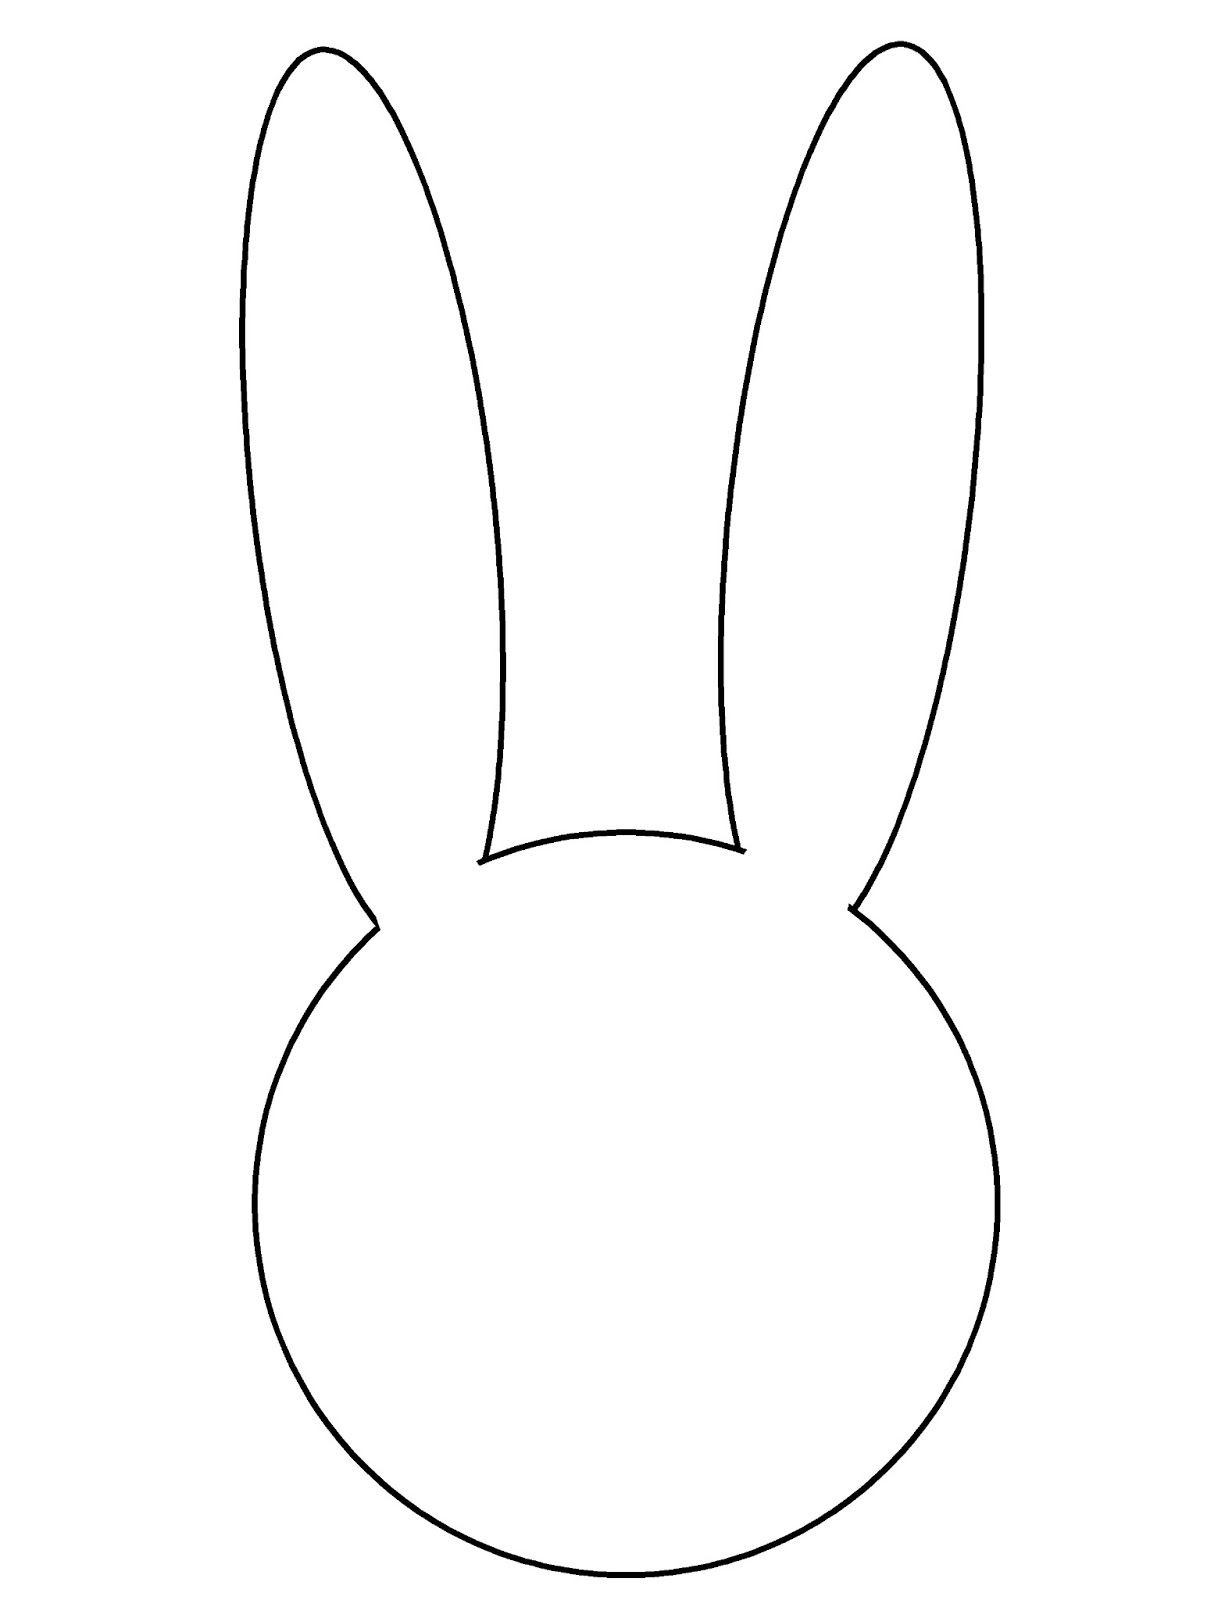 Bunny Face Template | Easter Bunny Face Template | Crafts For Kids - Free Printable Bunny Templates